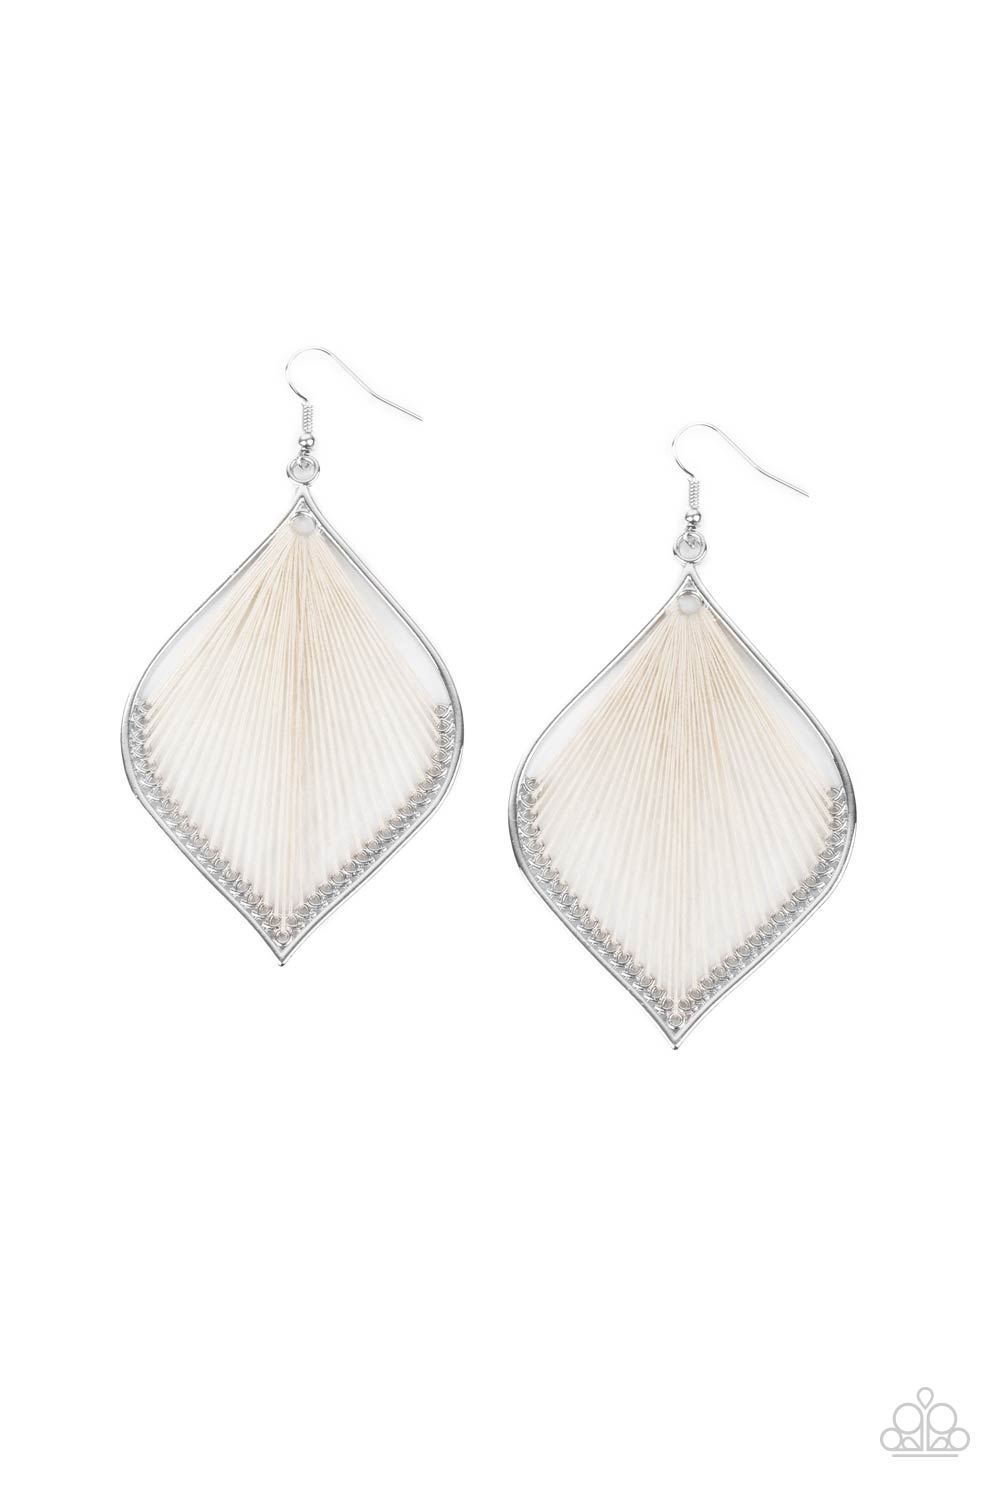 Paparazzi Accessories String Theory - White Earrings - Lady T Accessories